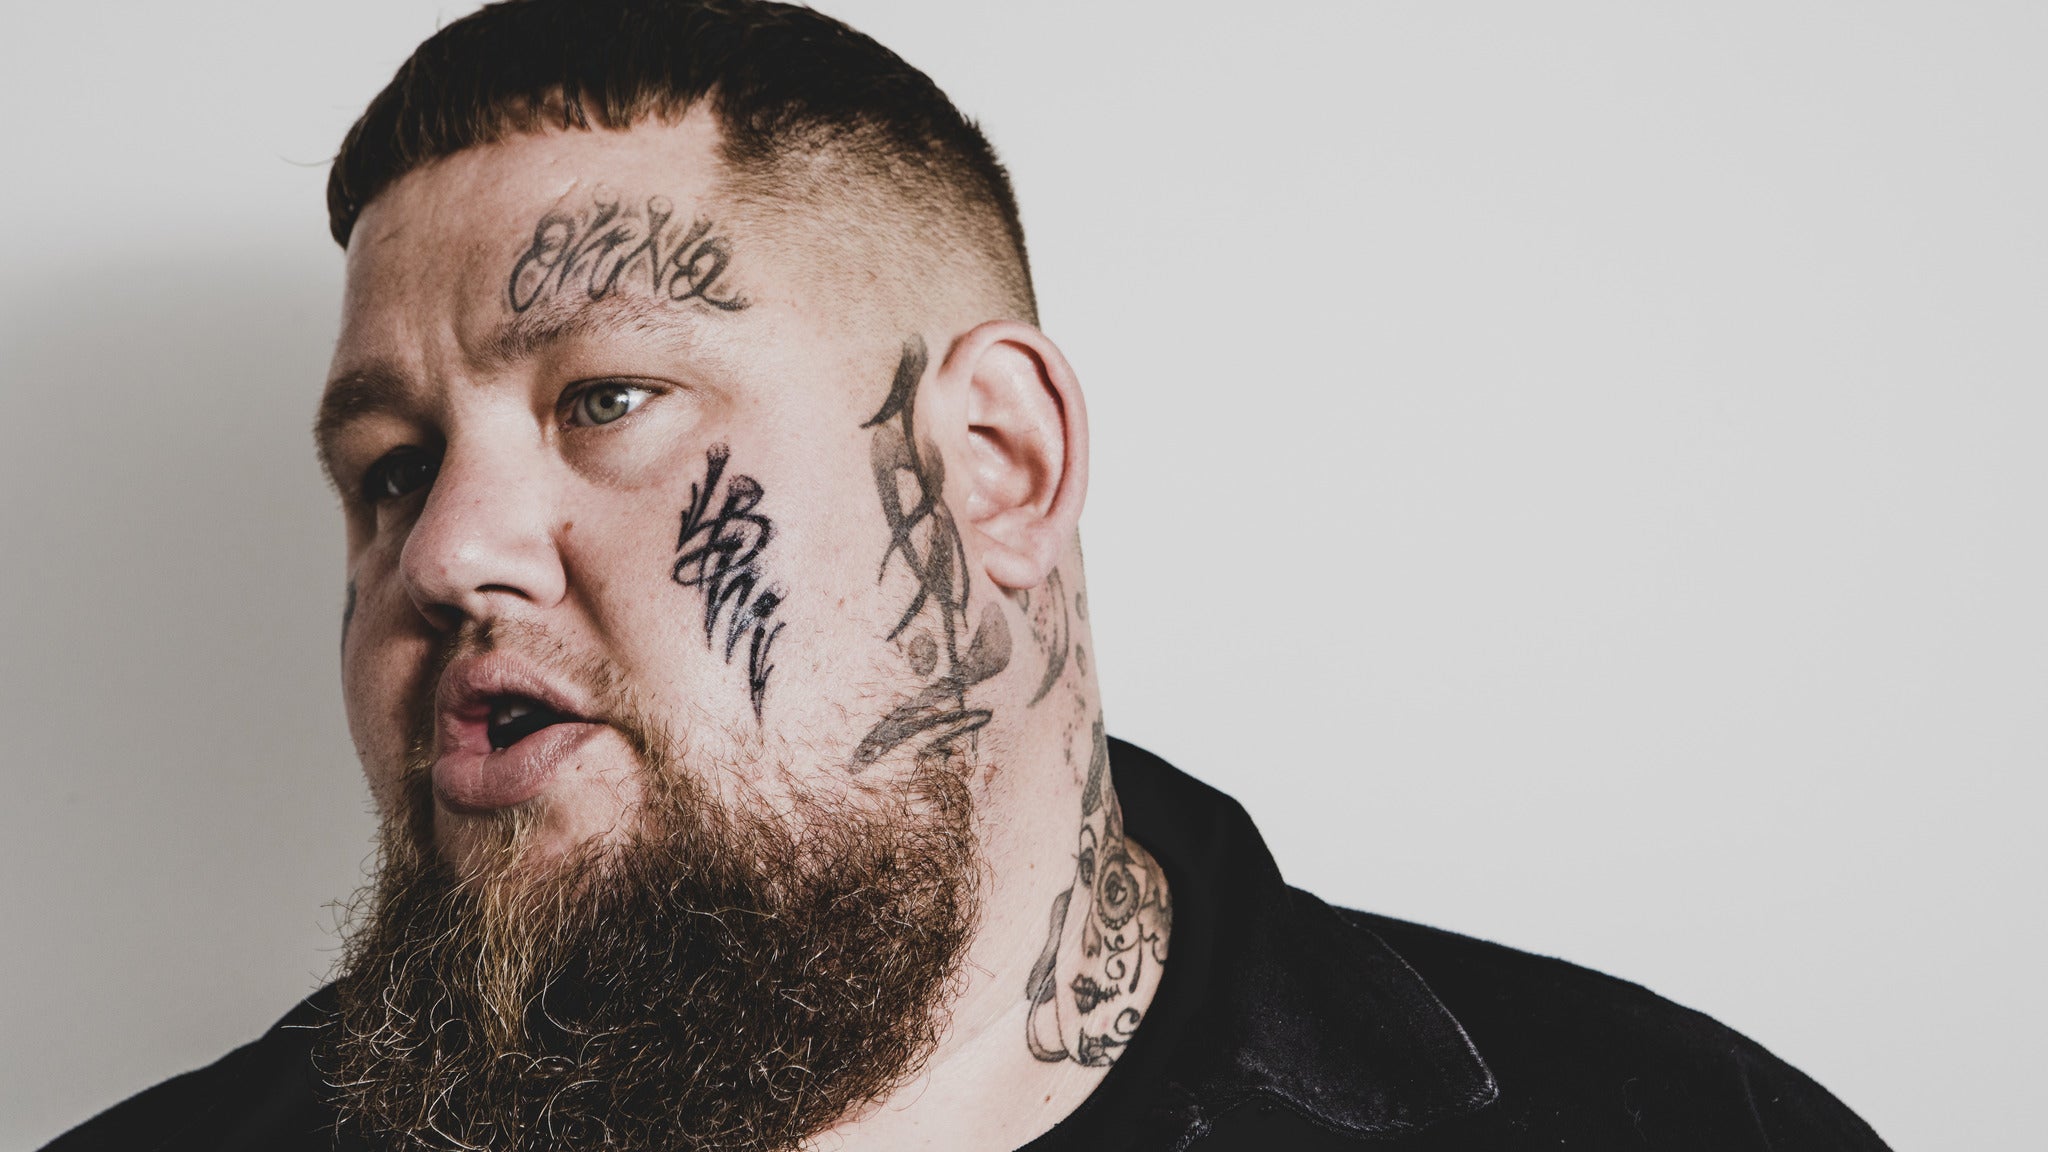 Image used with permission from Ticketmaster | RagNBone Man tickets